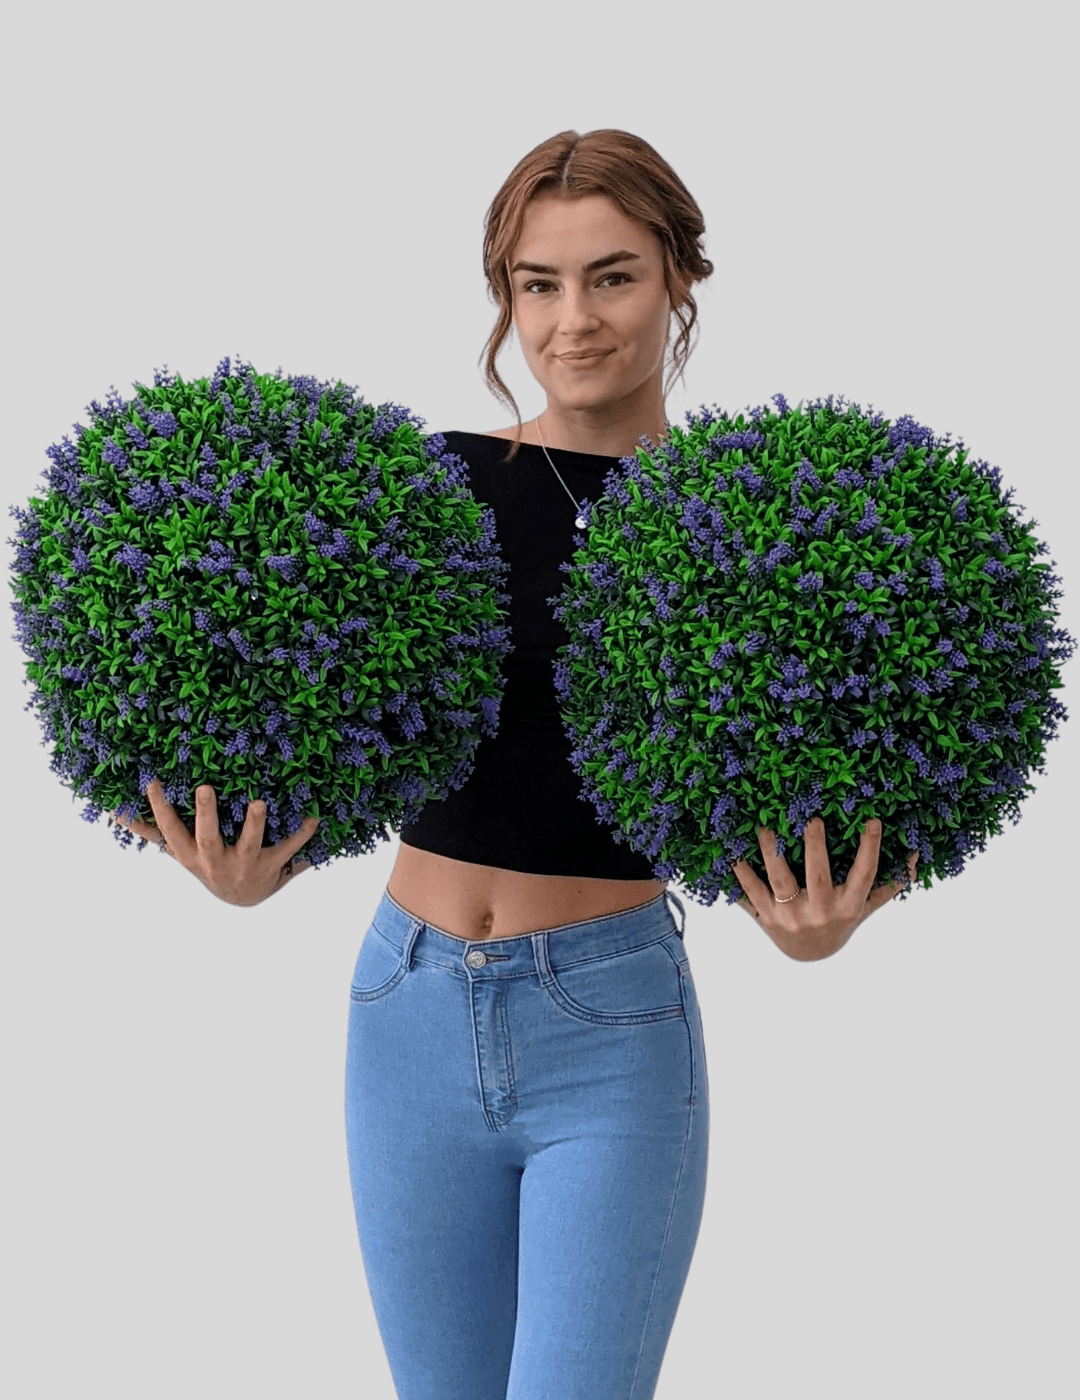 365 Curb Appeal Topiary ball 16" Size Large - Set of 2 Large Lavender Topiary Balls